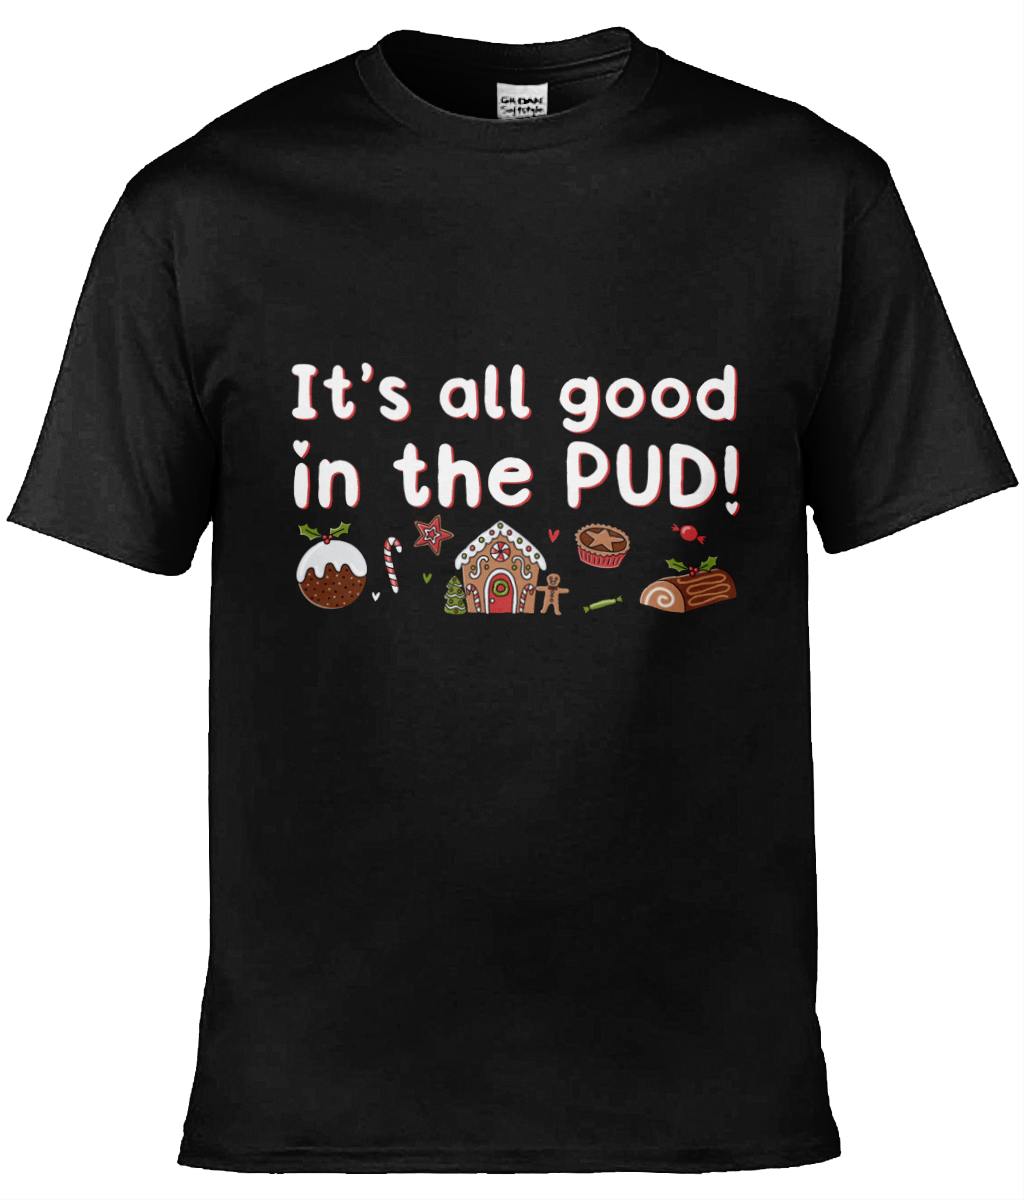 It's All Good In The Pud - Christmas T-shirt 2 - Multi Colour Available